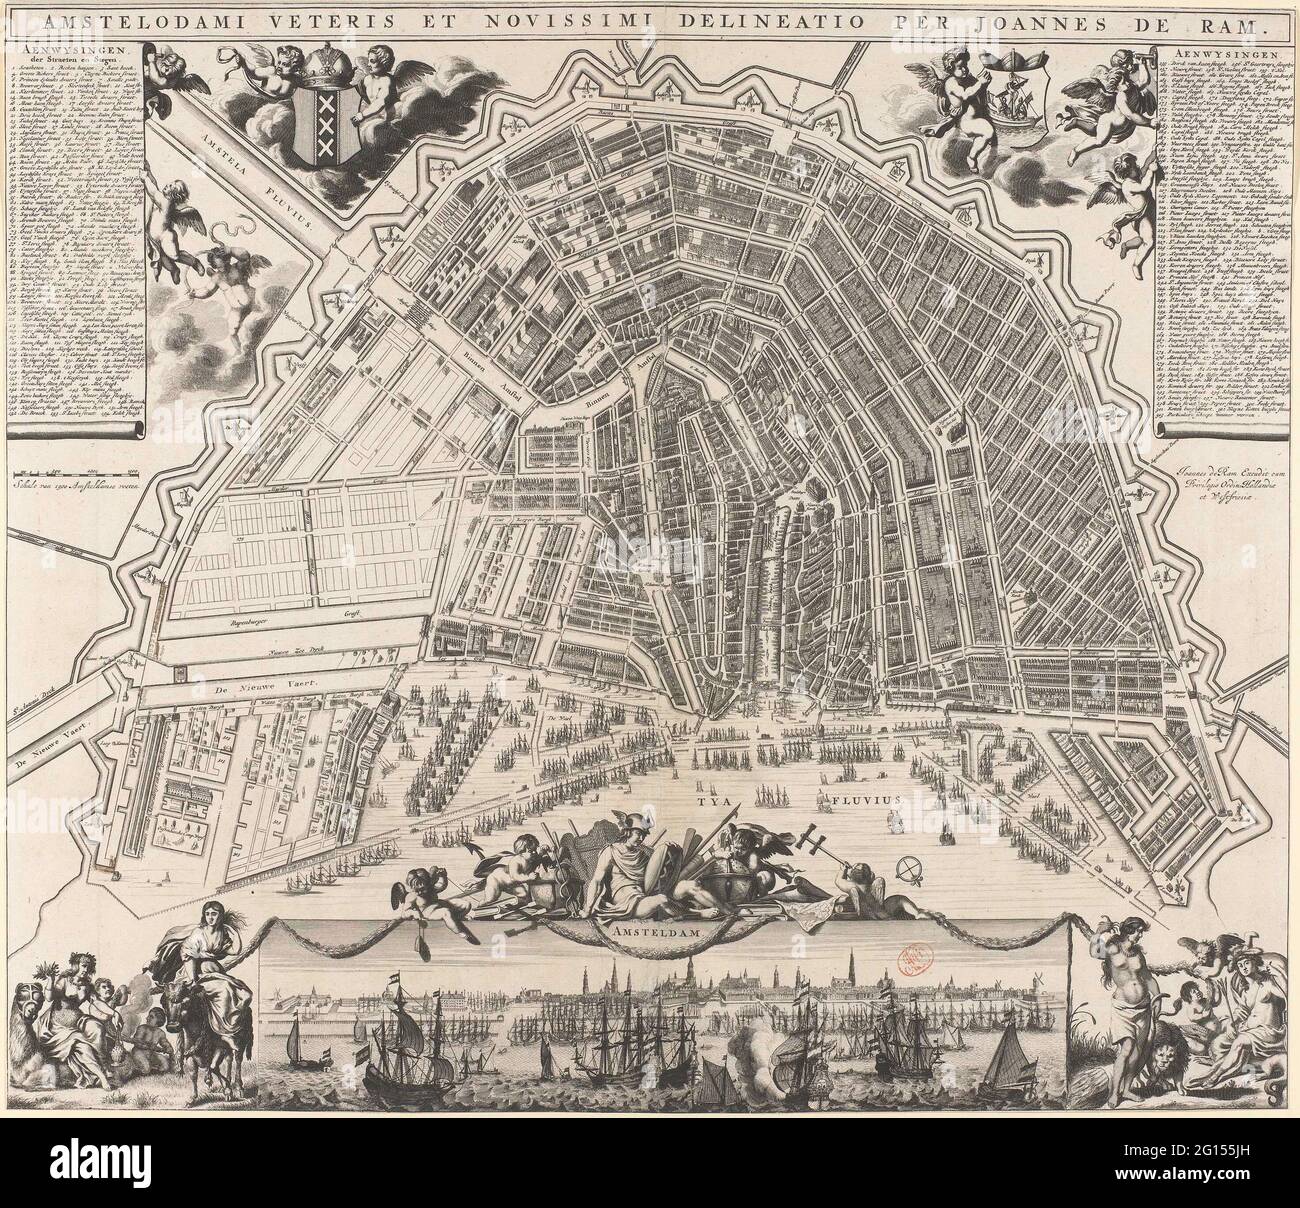 broeden katoen amateur Map of Amsterdam; Amstelodami Veteris et Novissimi Delineatio. Floor plan  in Vogelvluchtsplucht. Along the top the title. Above left the legend  1-154. Right of it putti with the coat of arms of